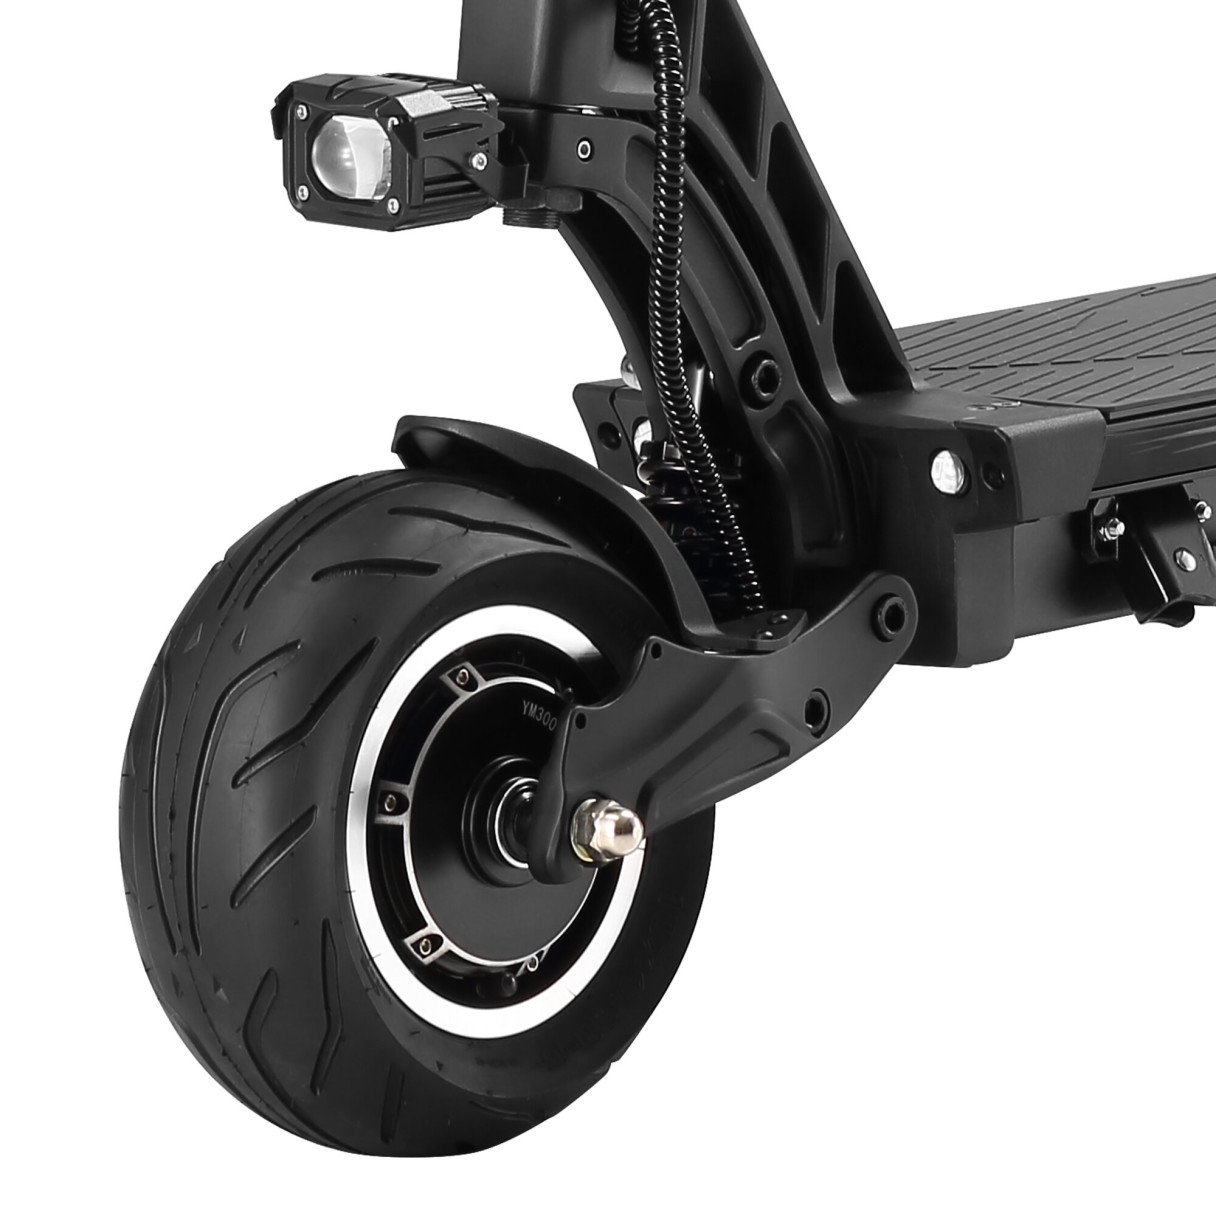 [EU DIRECT] YUME HAWK PRO Electric Scooter 60V 30AH Battery 3000W*2 Motor 10inch Tires 96KM Max Mileage 126KG Max Load Folding E-Scooter